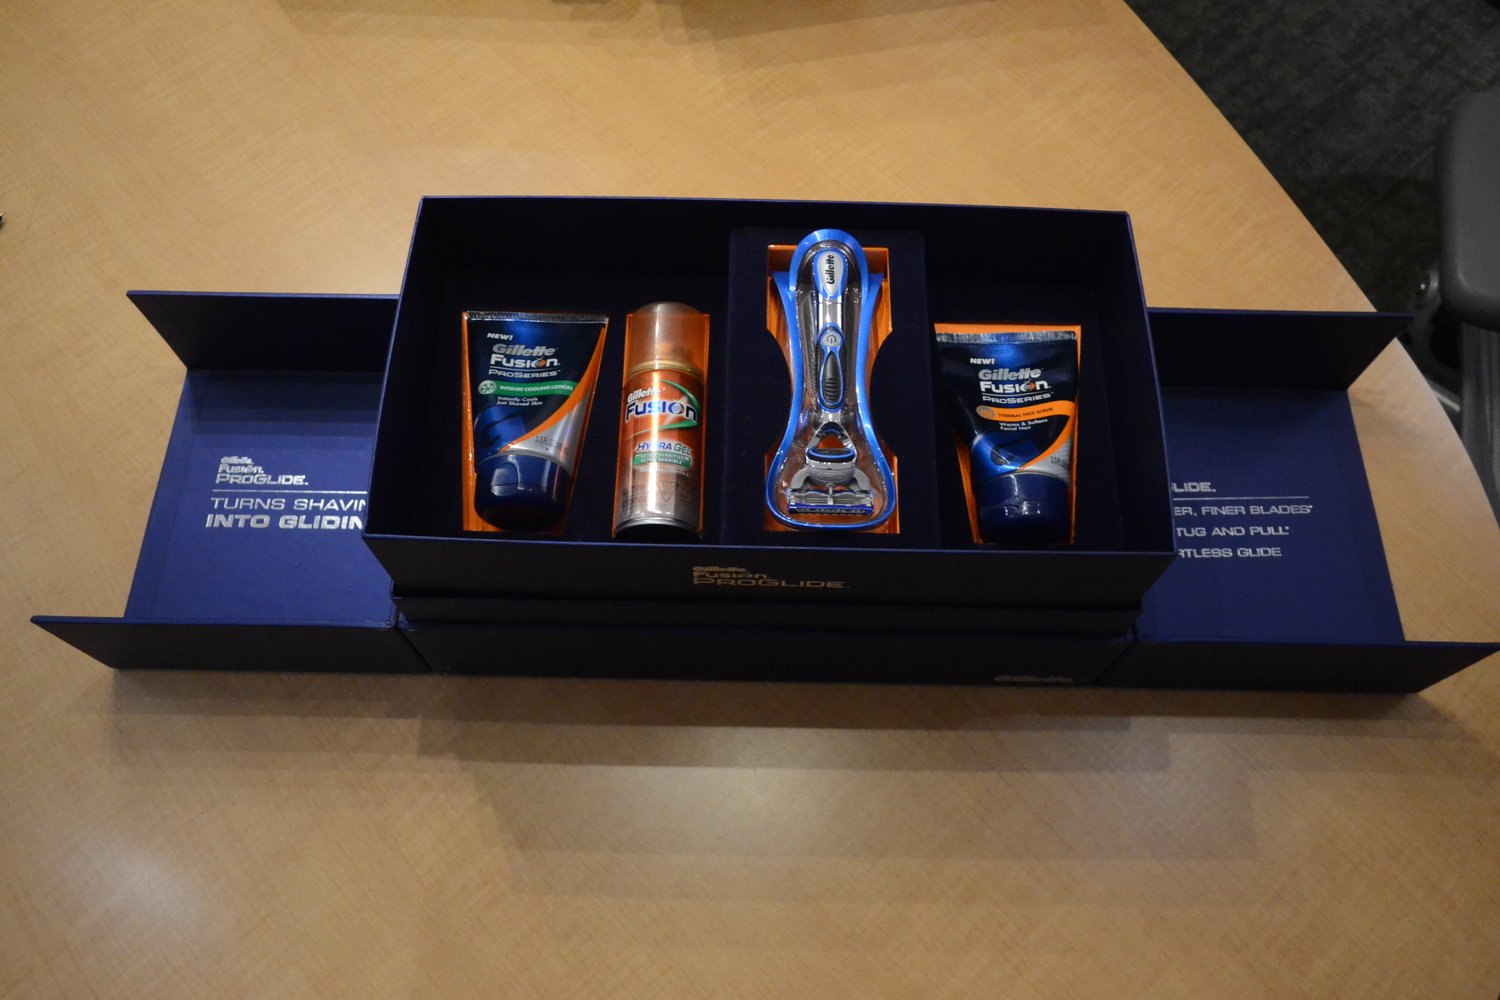 An influencer kit made for Gillette includes a gravity-defying ribbon that raises the product up as it is opened.